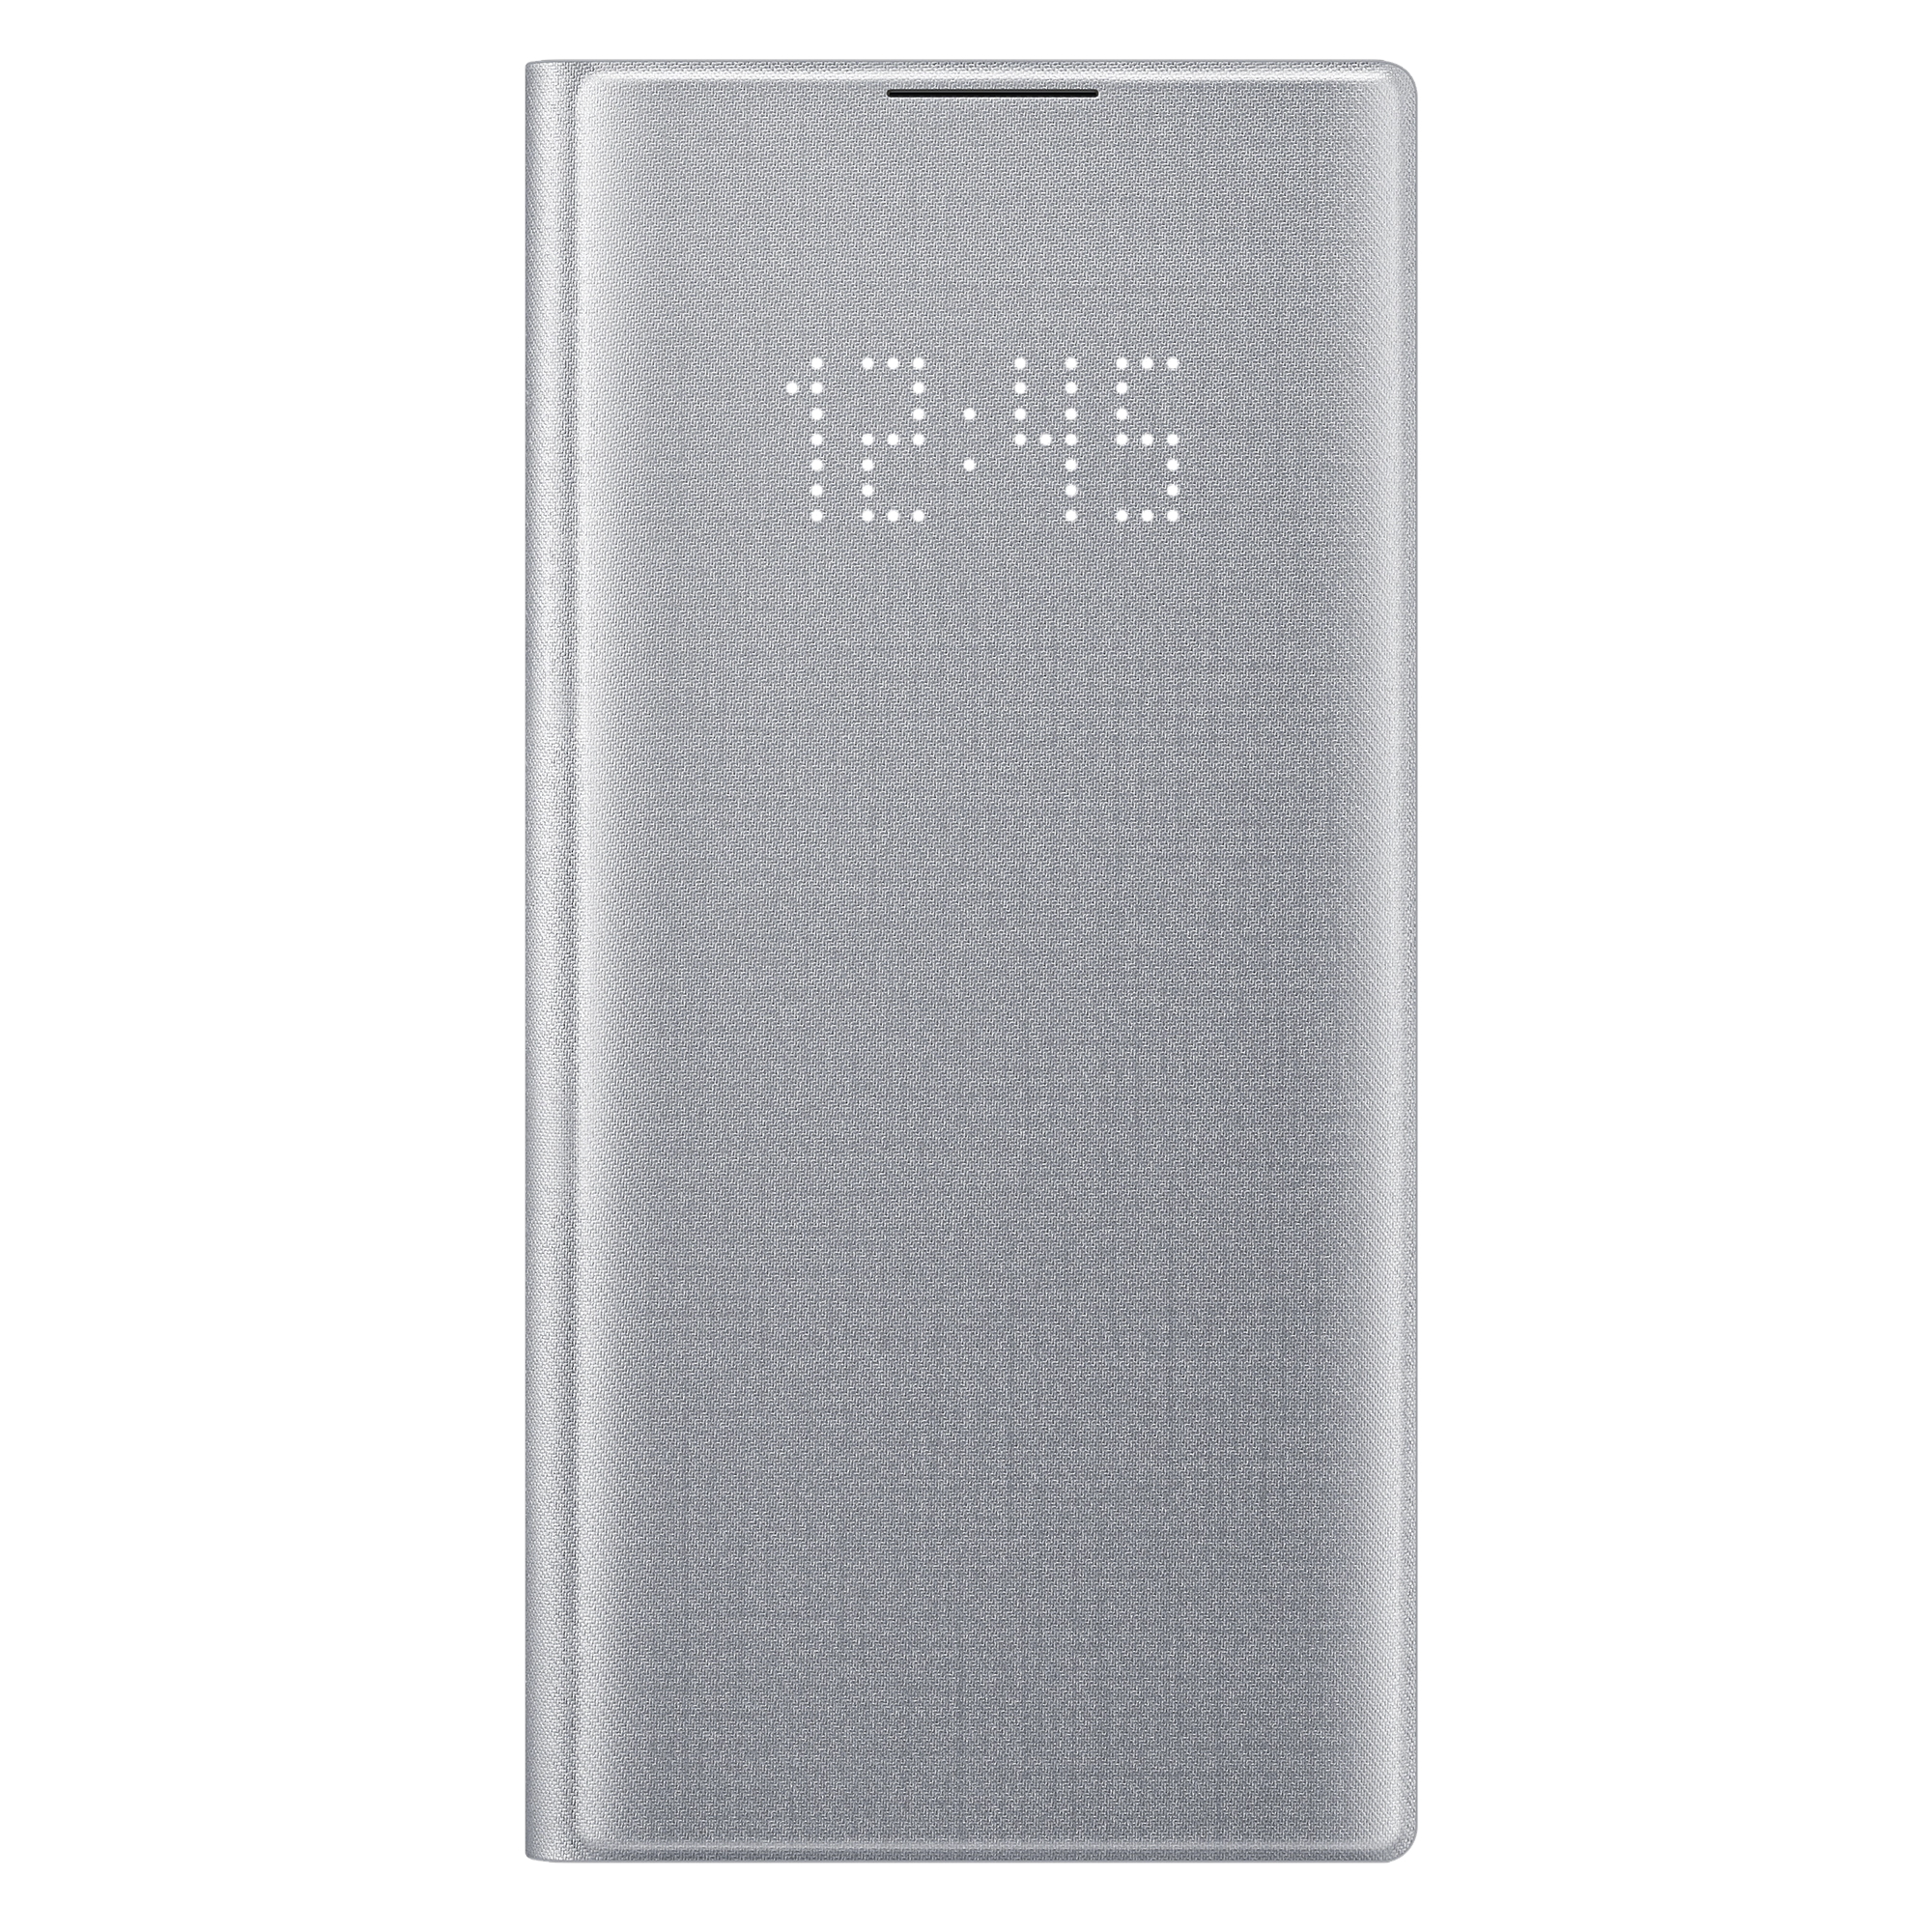 Husa protectie Samsung Flip LED View Cover pentru Galaxy Note 10 (N970) Silver